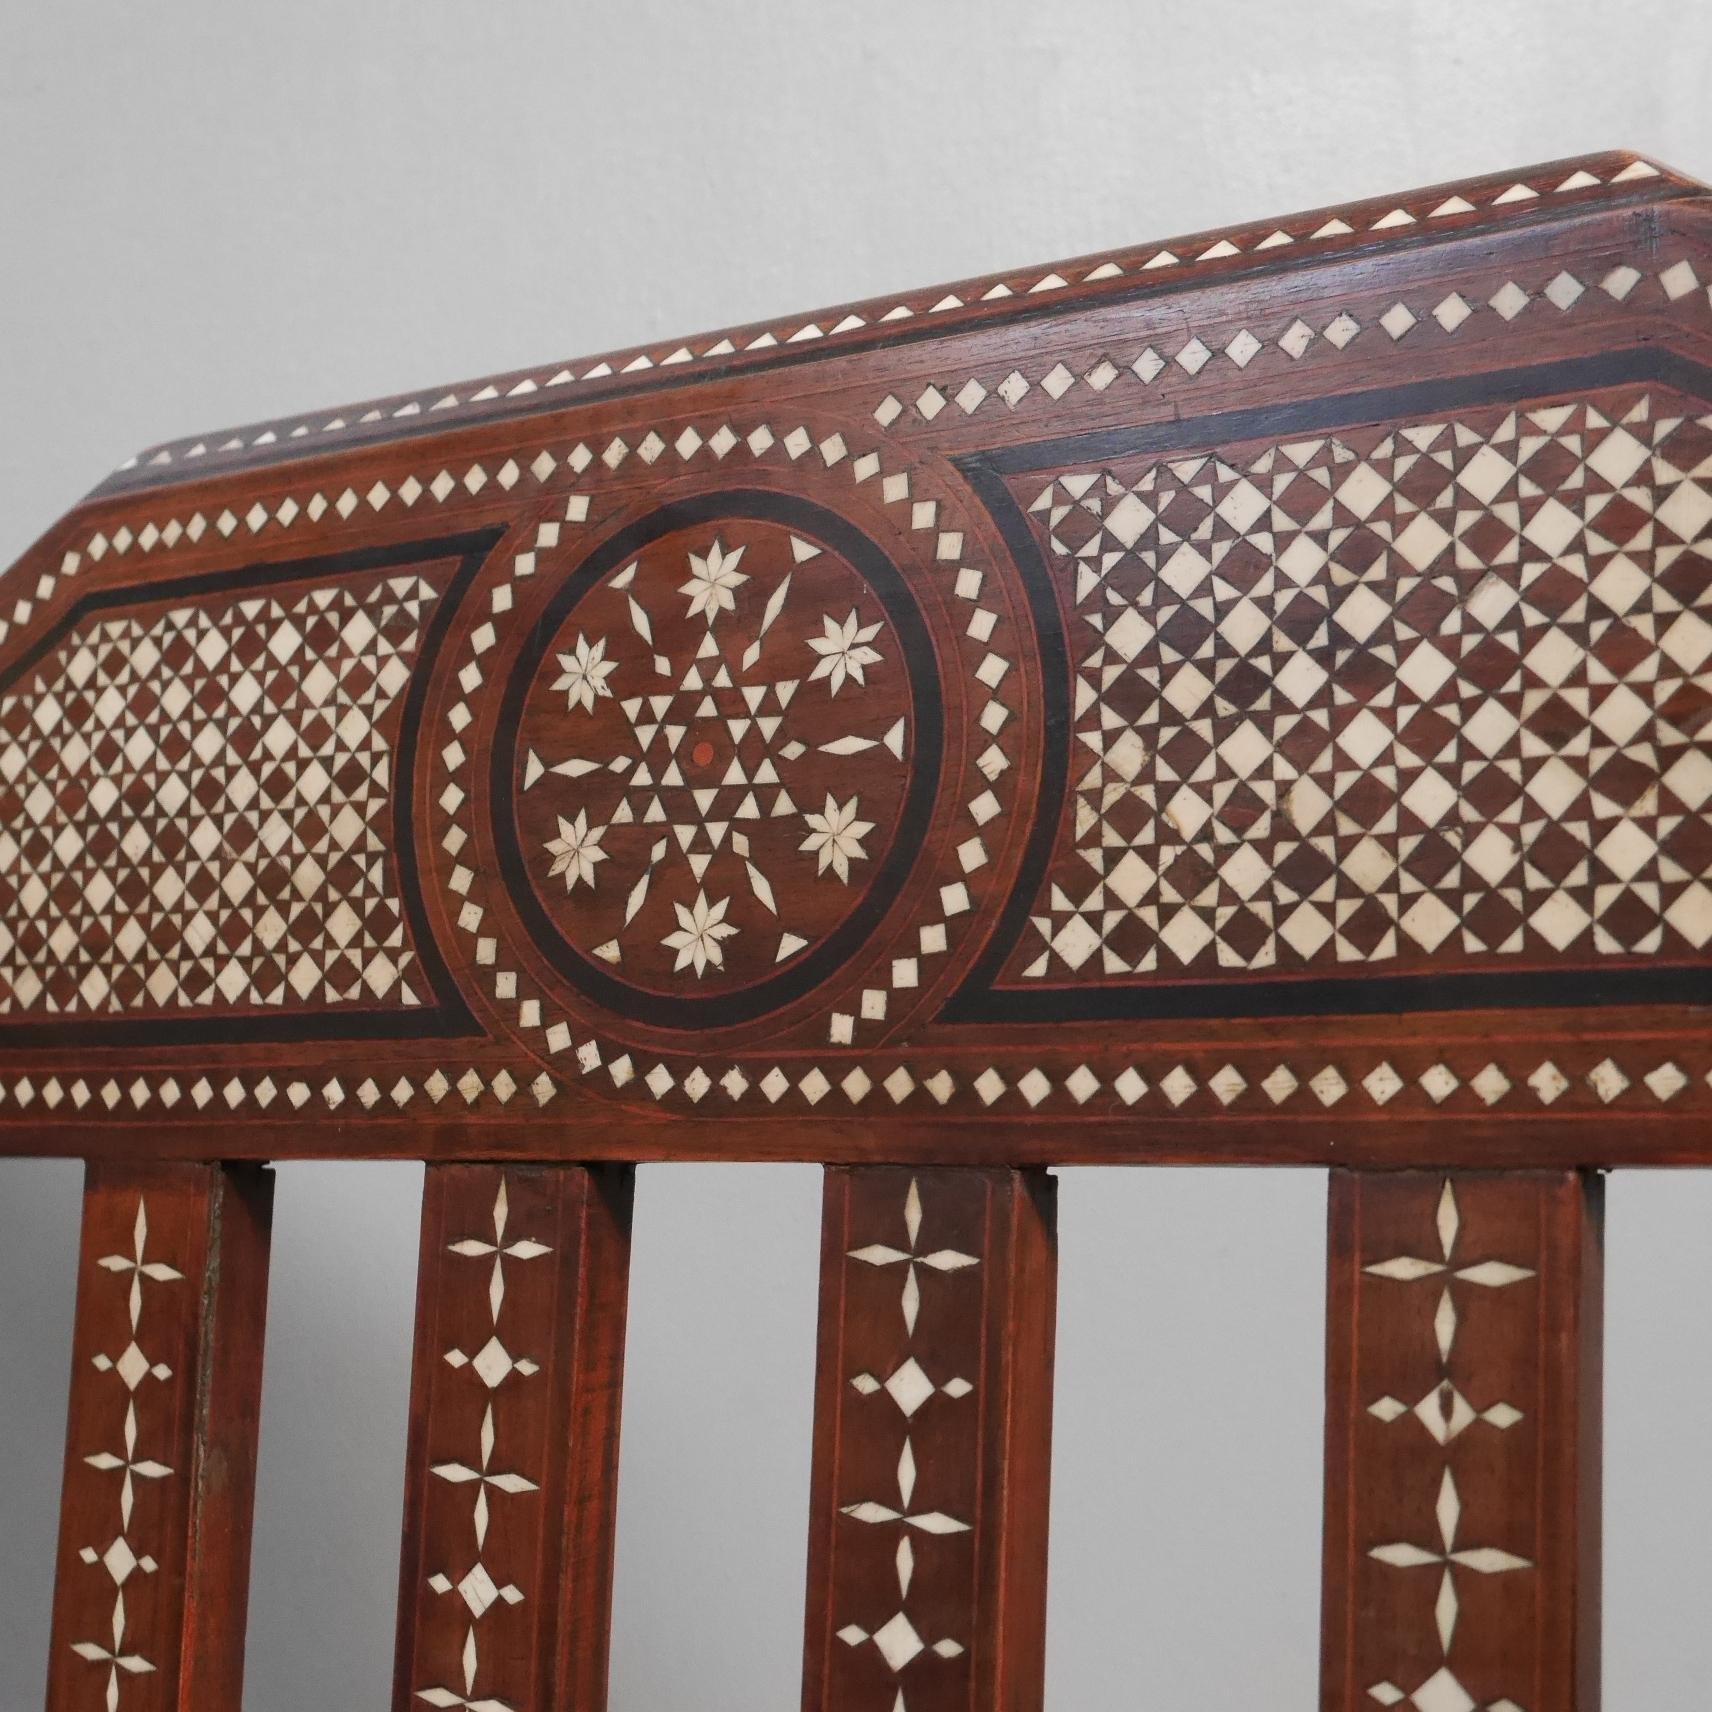 An inlaid moorish seat.
An exquisite & rare moorish seat / bench in the Hoshiarpur taste, in solid hardwood throughout with some outstanding detail to both the carpentry work and inlay. Raised on shapely legs with a stretcher to the base & profusely